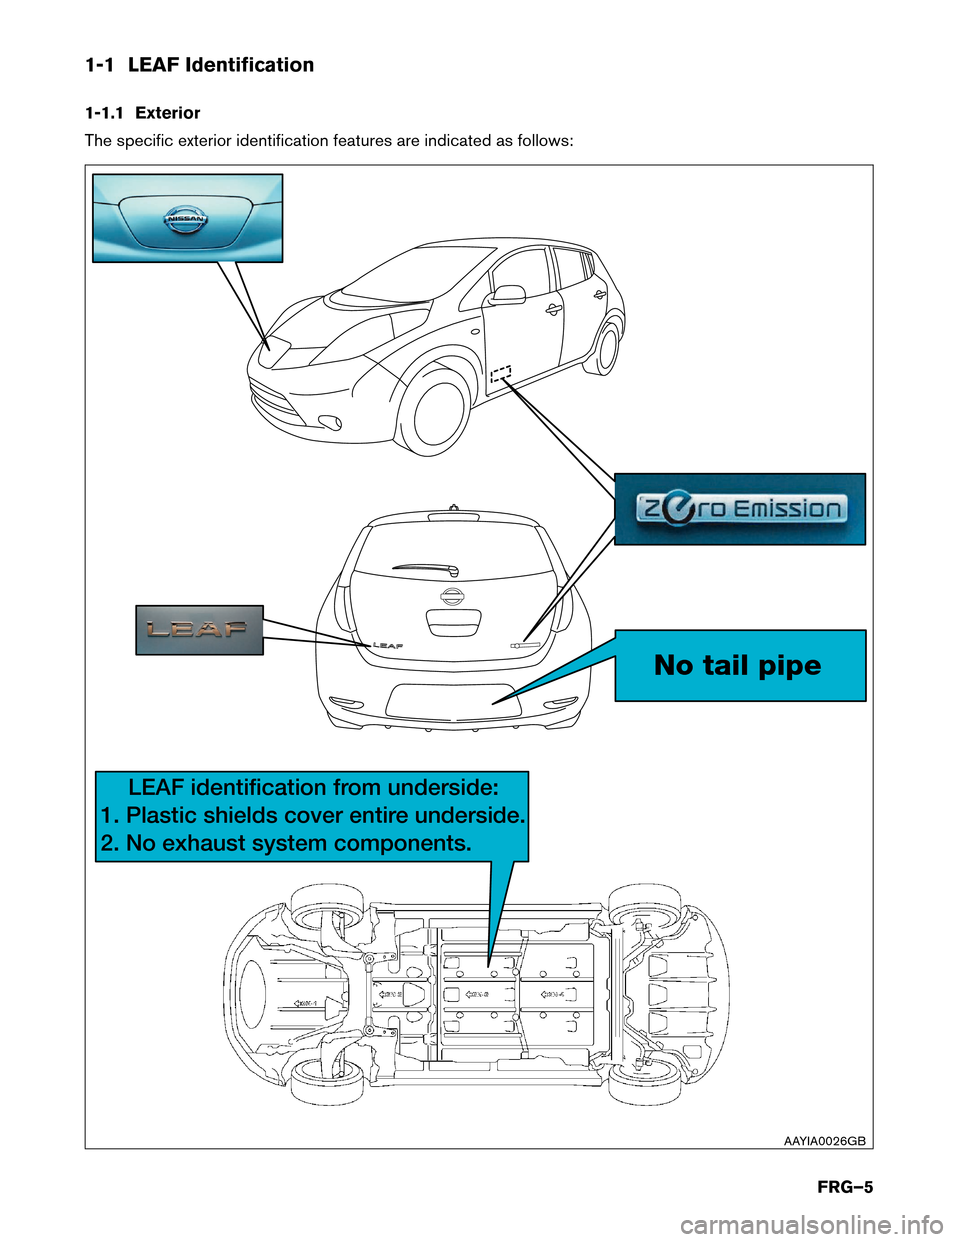 NISSAN LEAF 2014 1.G First Responders Guide 1-1 LEAF Identification
1-1.1
Exterior
The specific exterior identification features are indicated as follows: No tail pipe
LEAF identification from underside:
1. Plastic shields cover entir
 e under